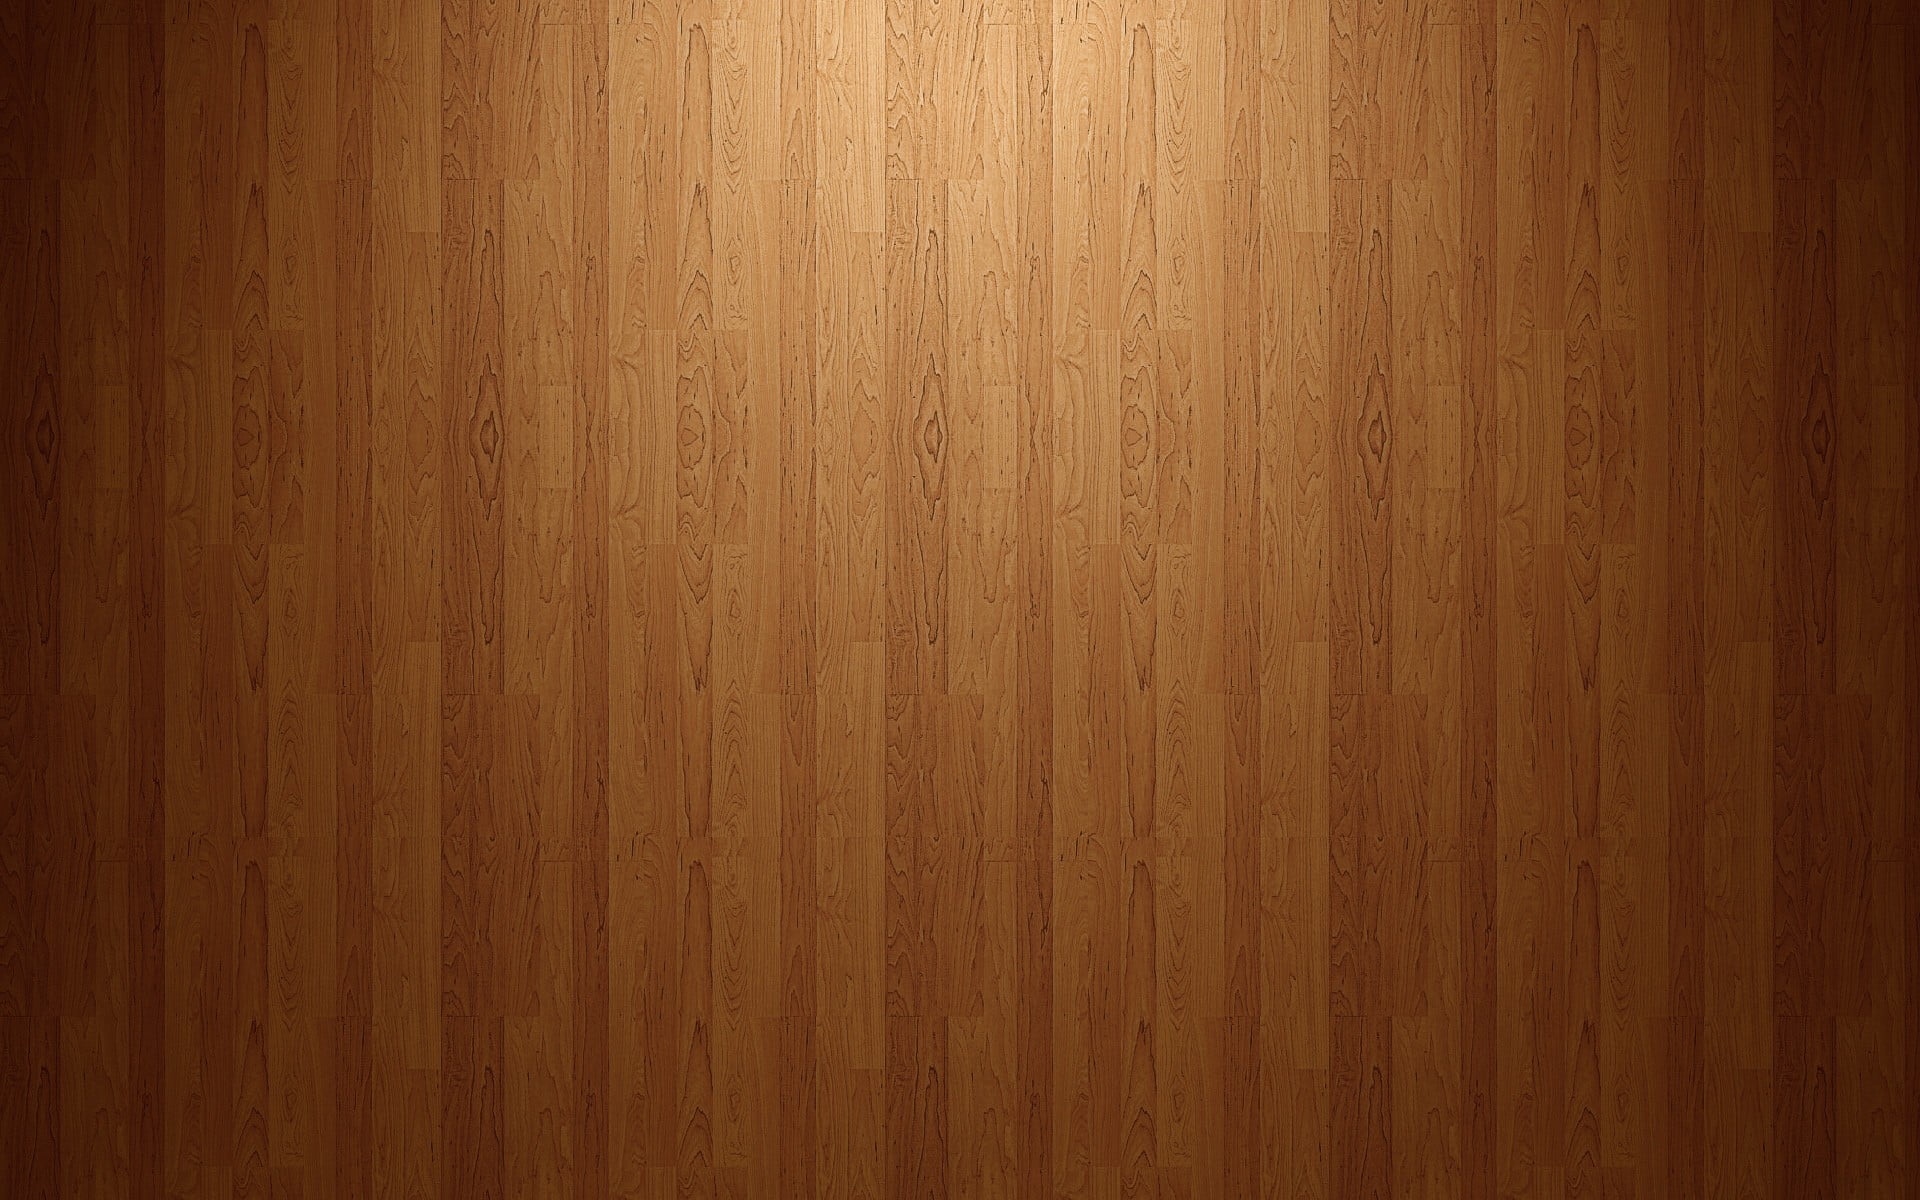 brown wooden surface, texture, pattern, simple, backgrounds, flooring